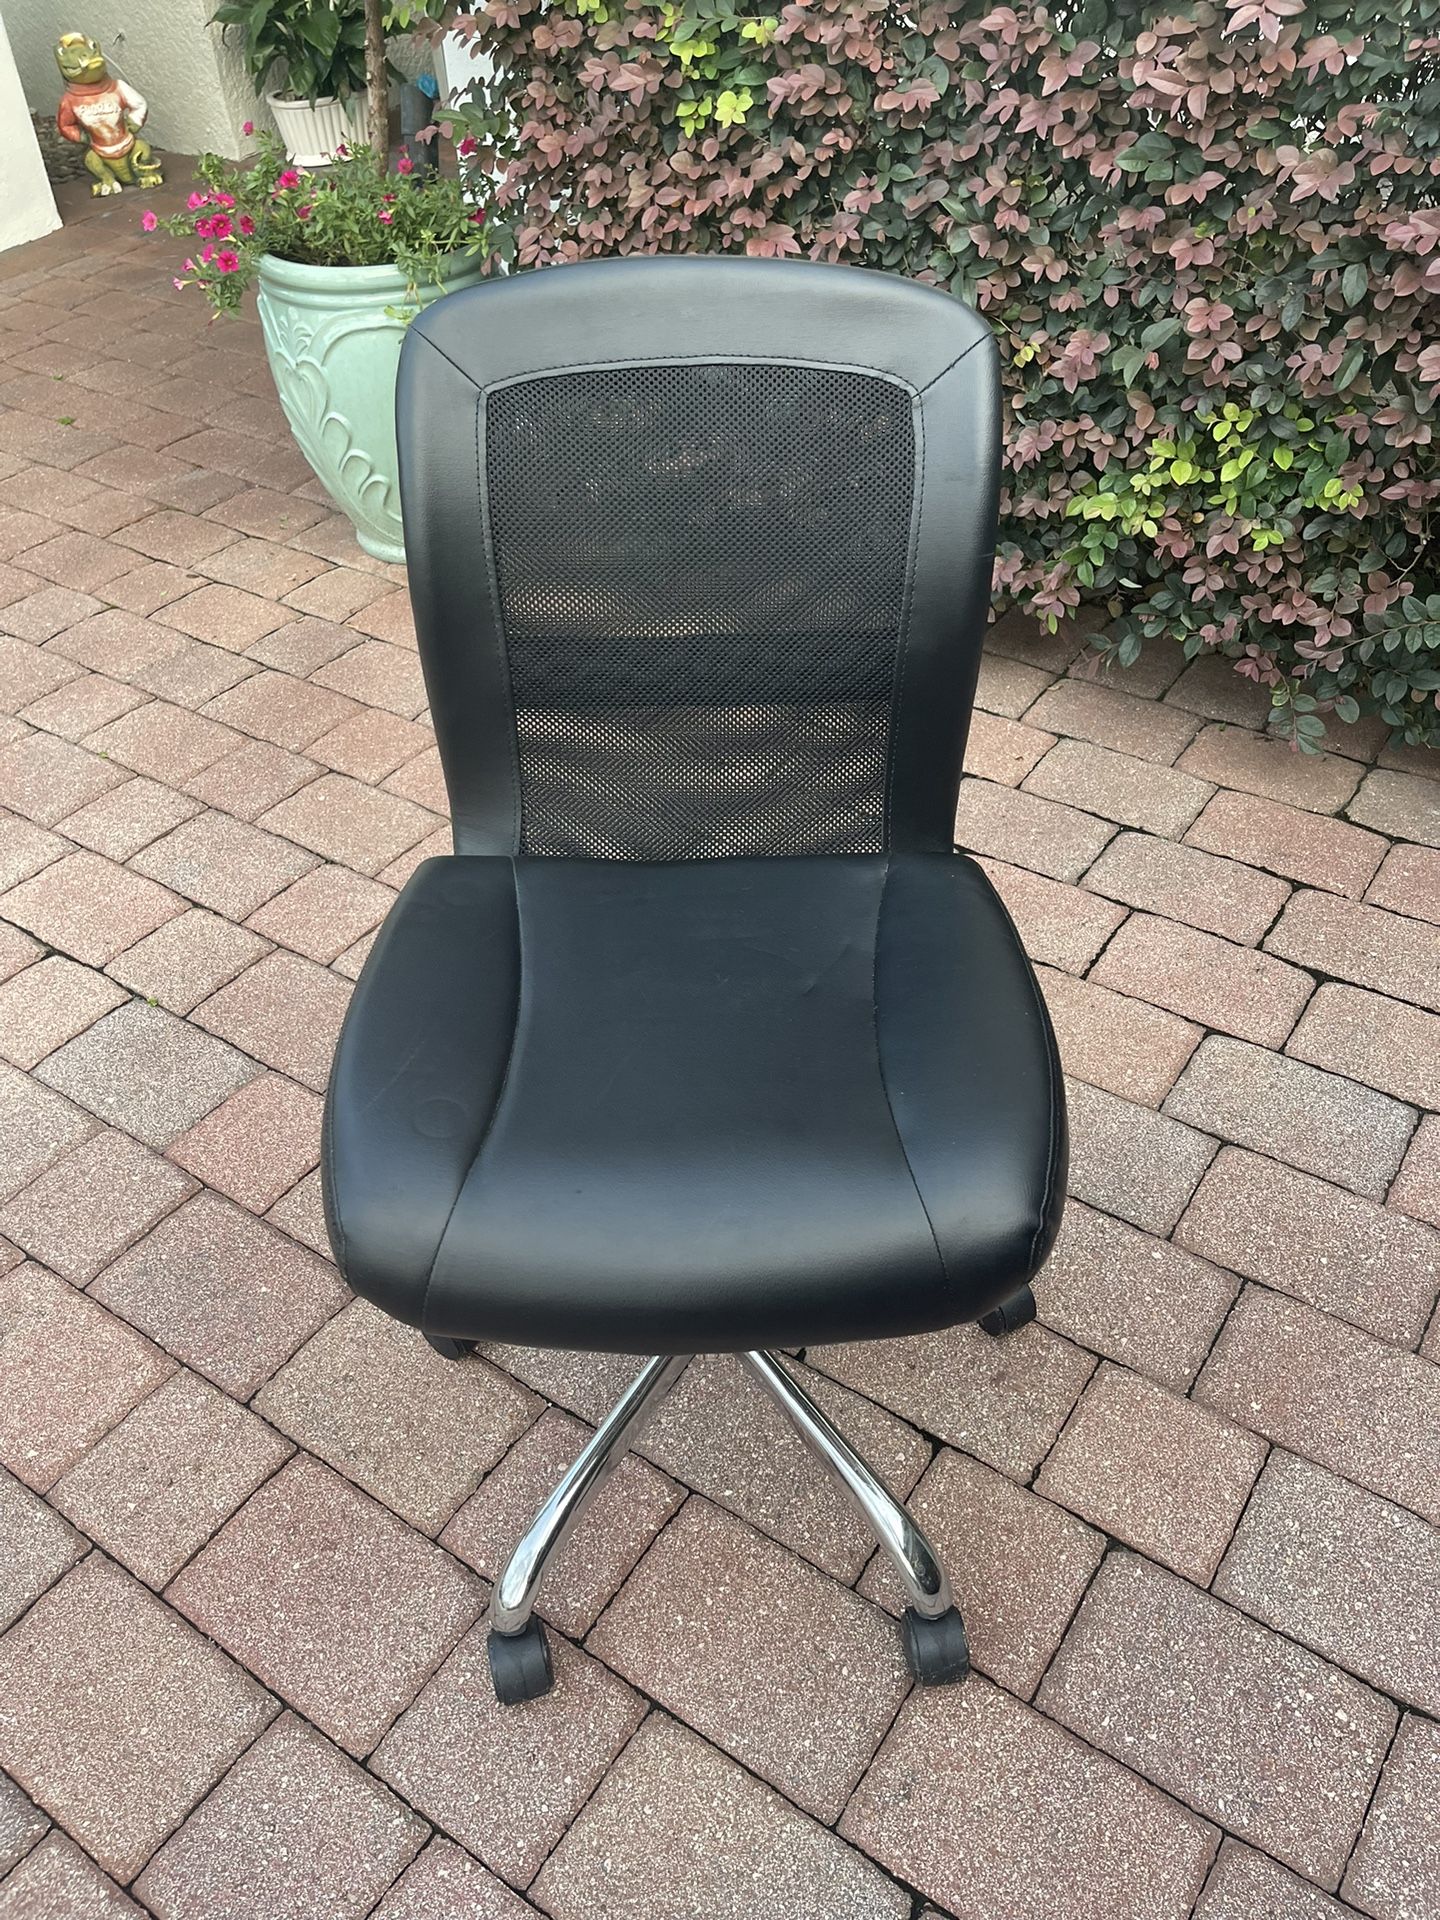 Mesh Back Swivel Chair-Located in Sanford near Lake Mary. Pick up only